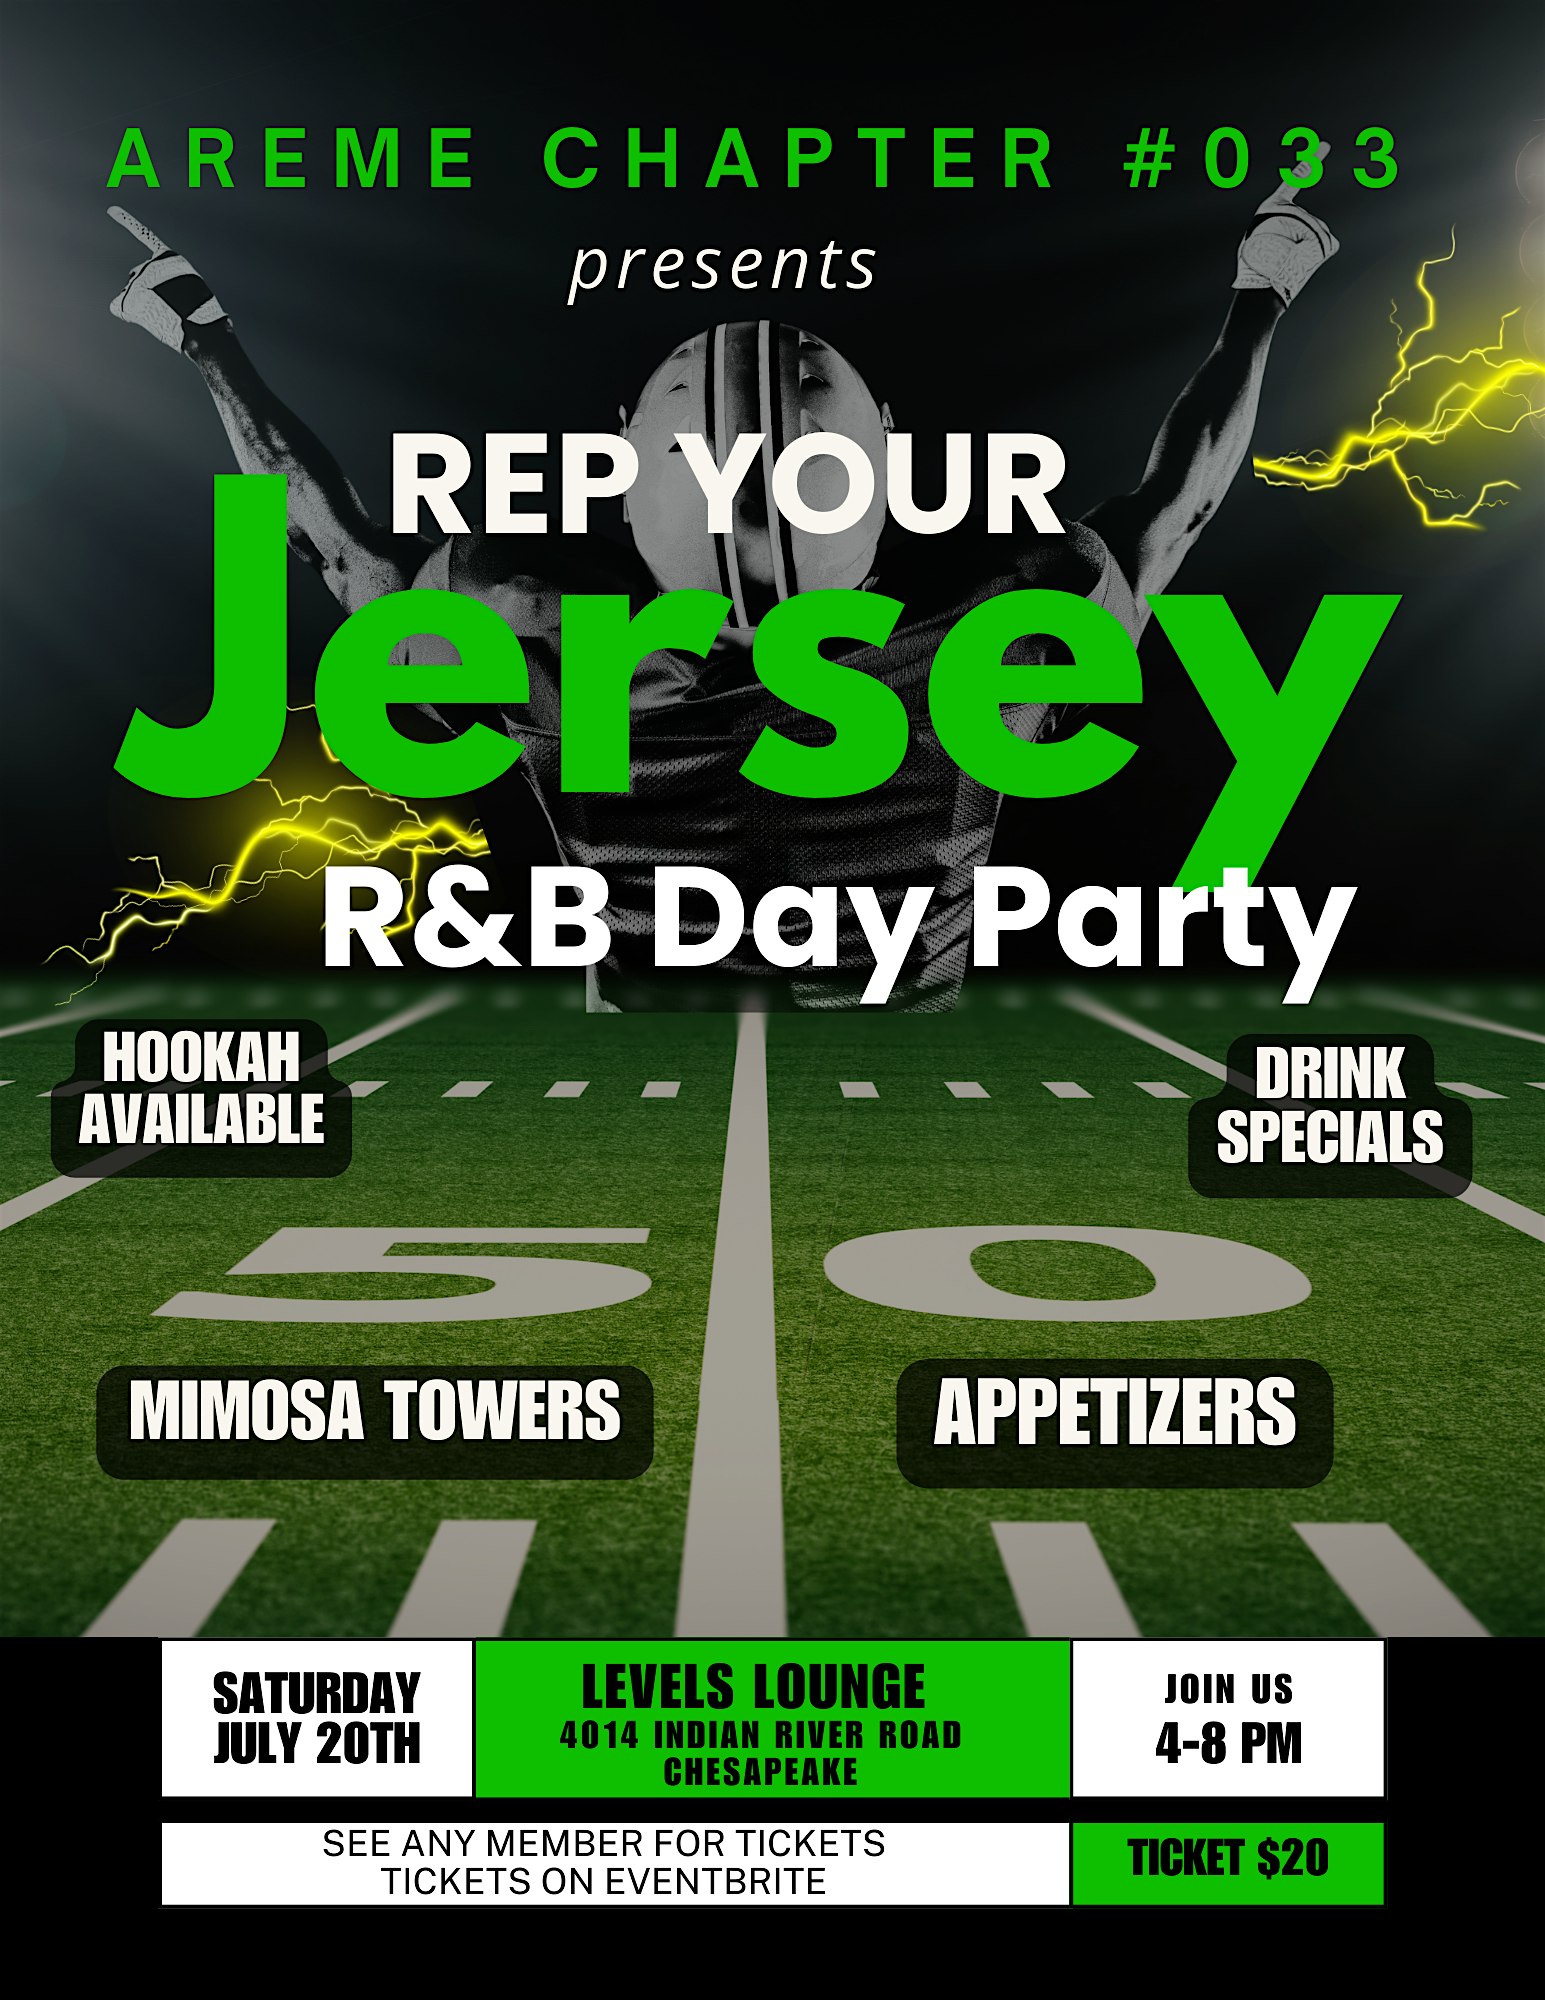 Join us for a Grown & Sexy Jersey Day Party. It's an R&B thing.